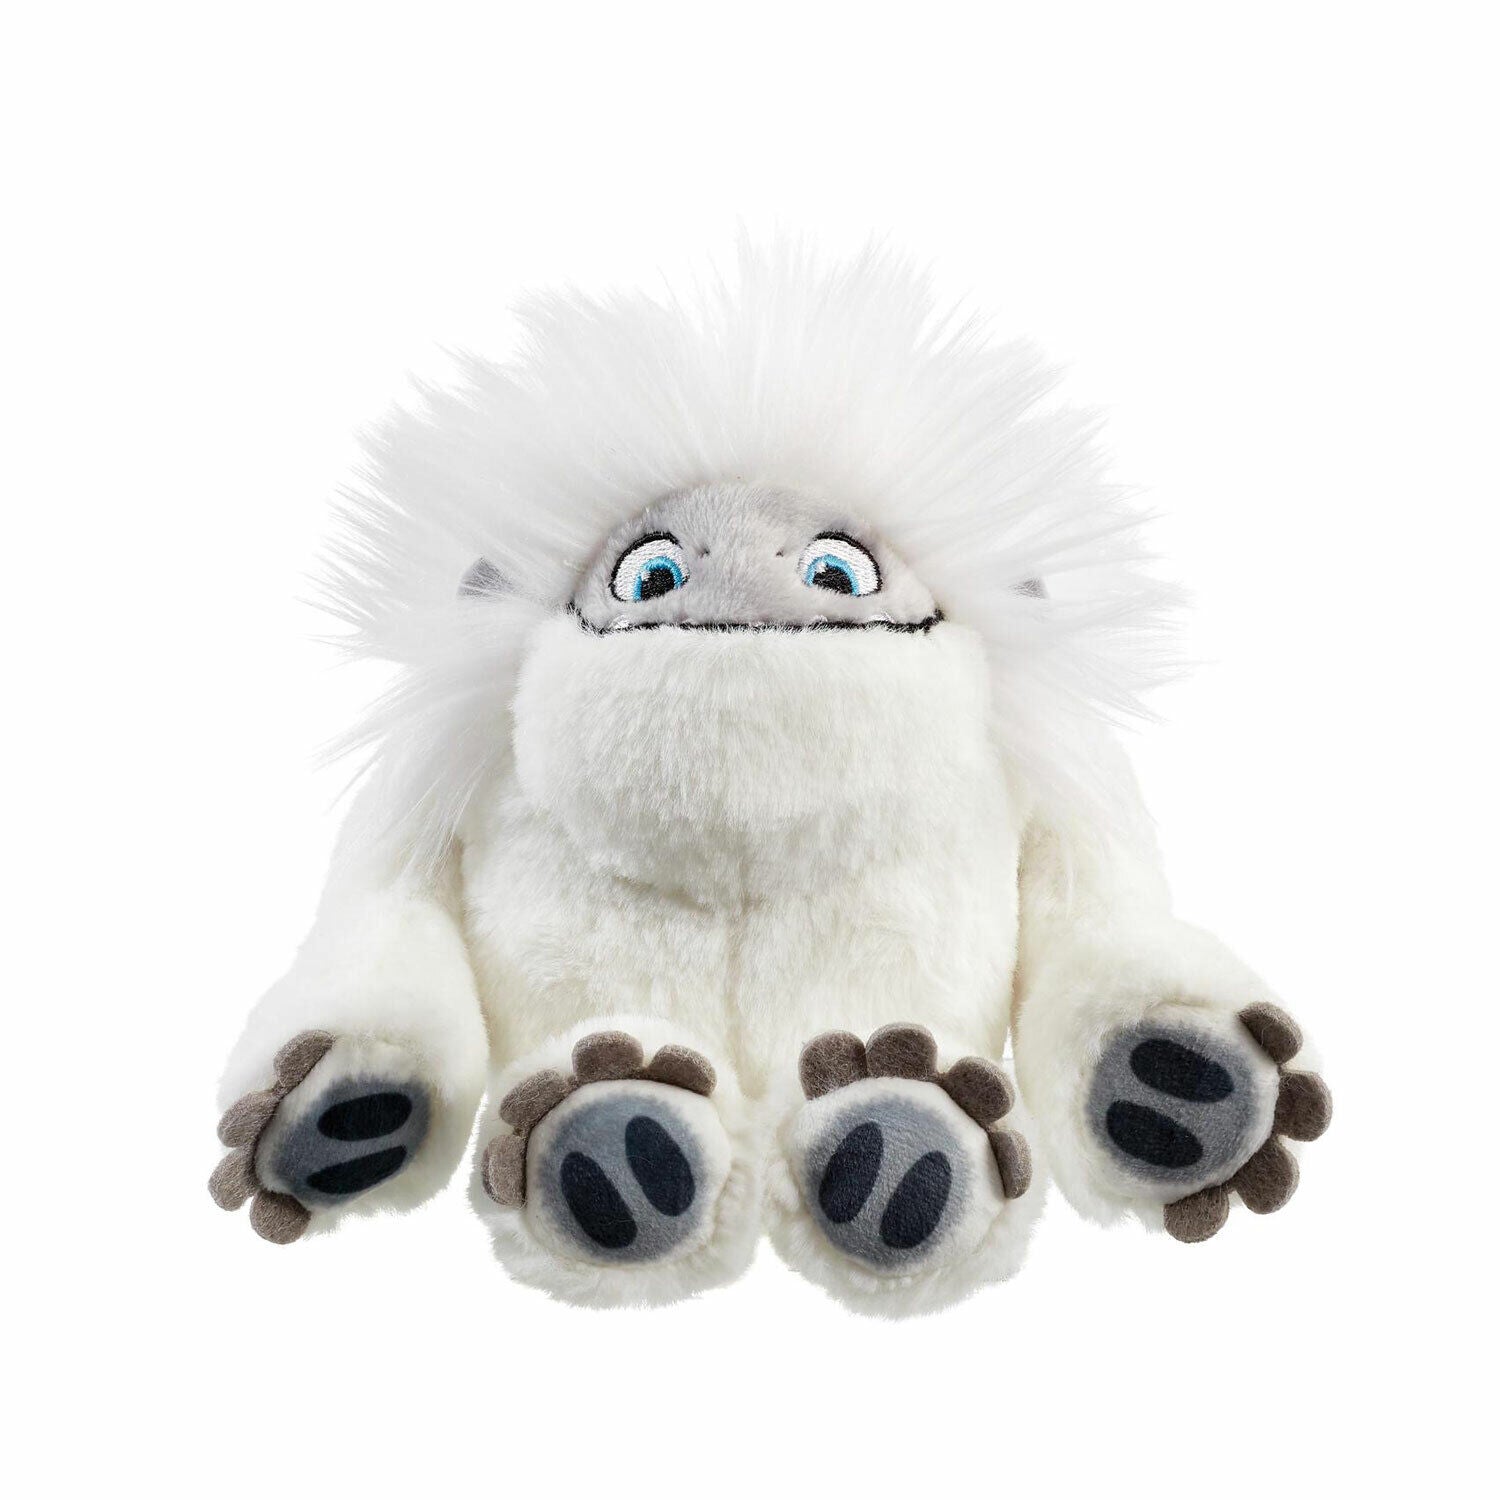 Get Your Favourite DreamWorks Abominable Plush Toy - 18cm Soft and Cuddly!